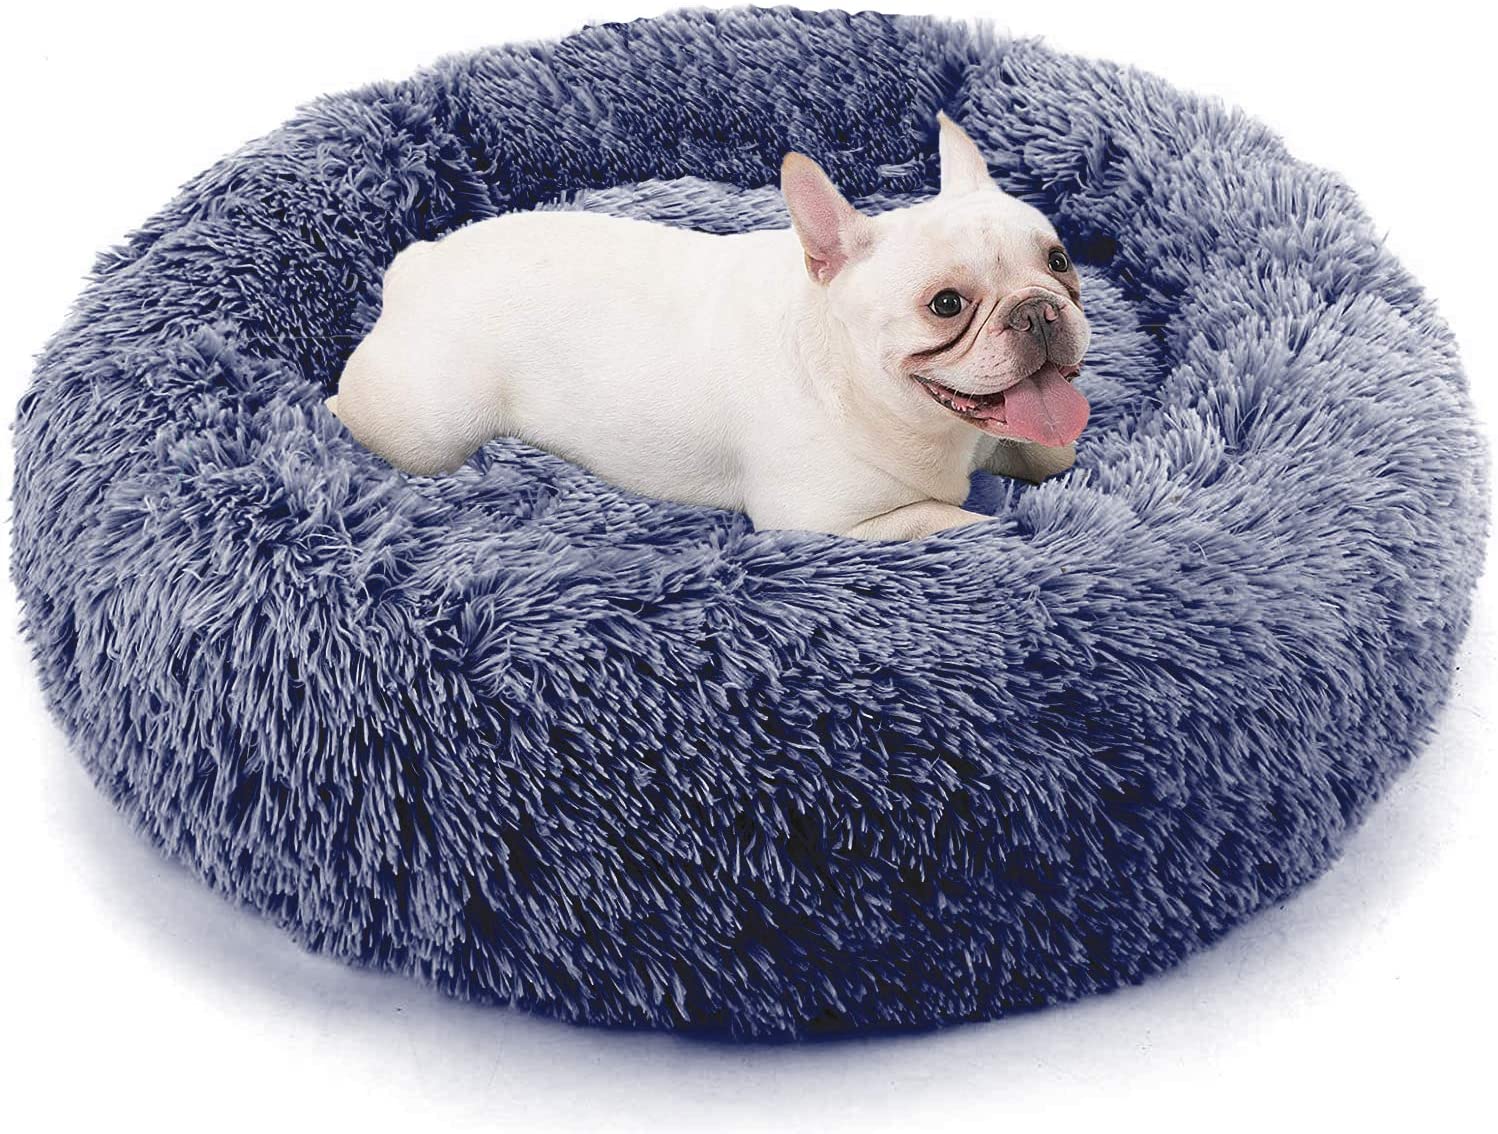 Mr. Chuck - Snuggly Dog Bed Mr. Chuck Pet Store